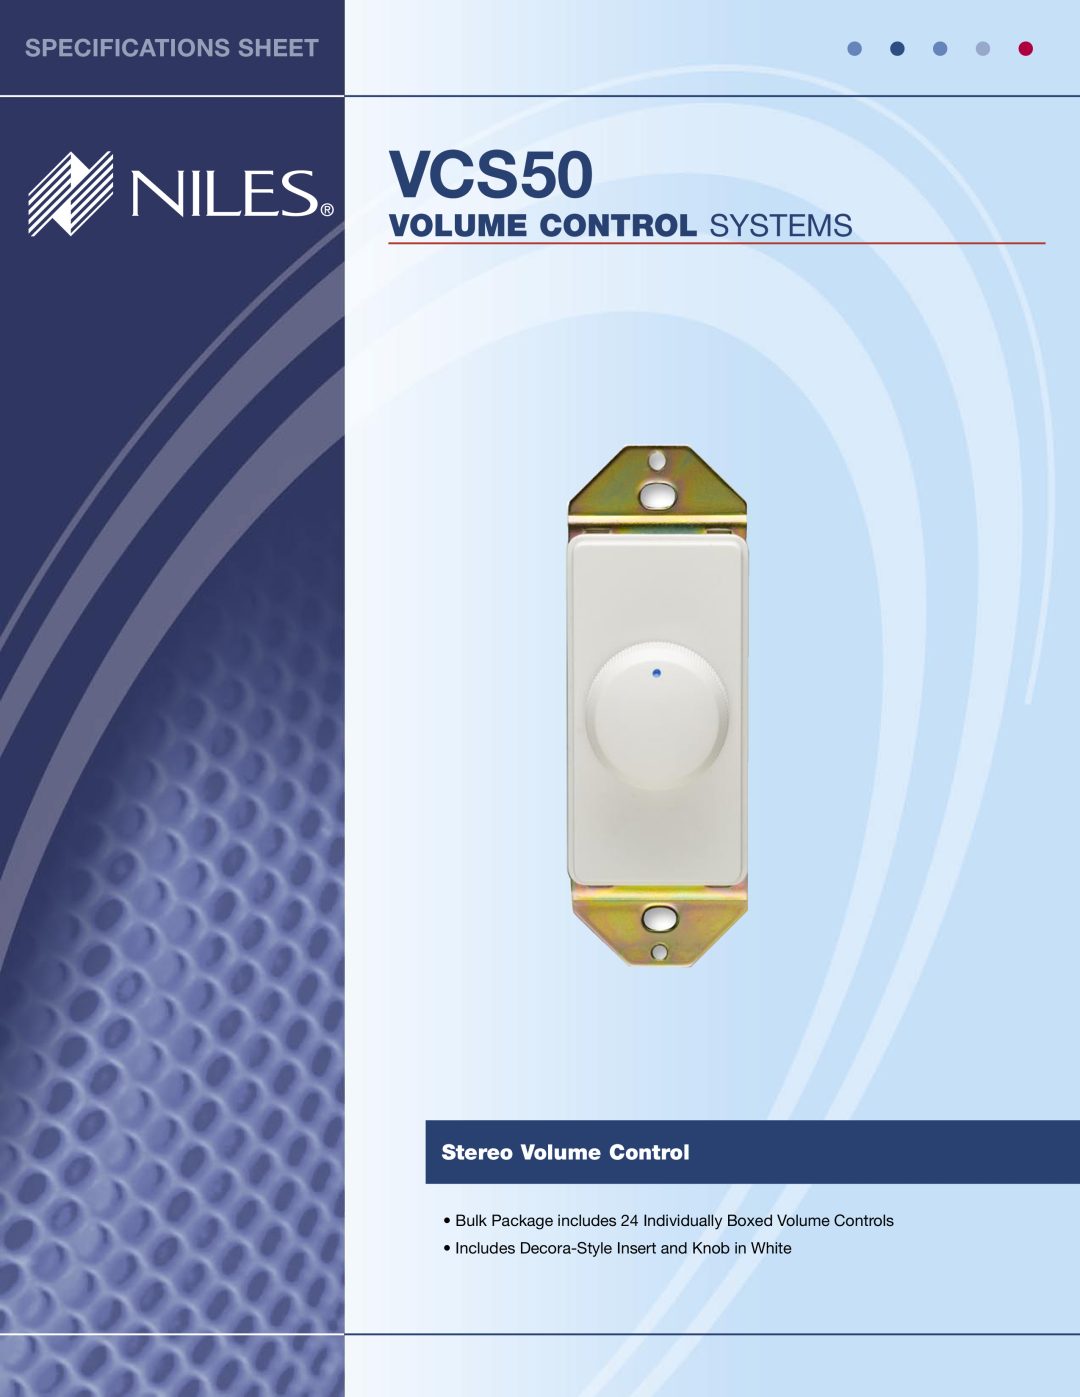 Niles Audio VCS50 specifications •Includes Decora-StyleInsert and Knob in White, Volume Control Systems 